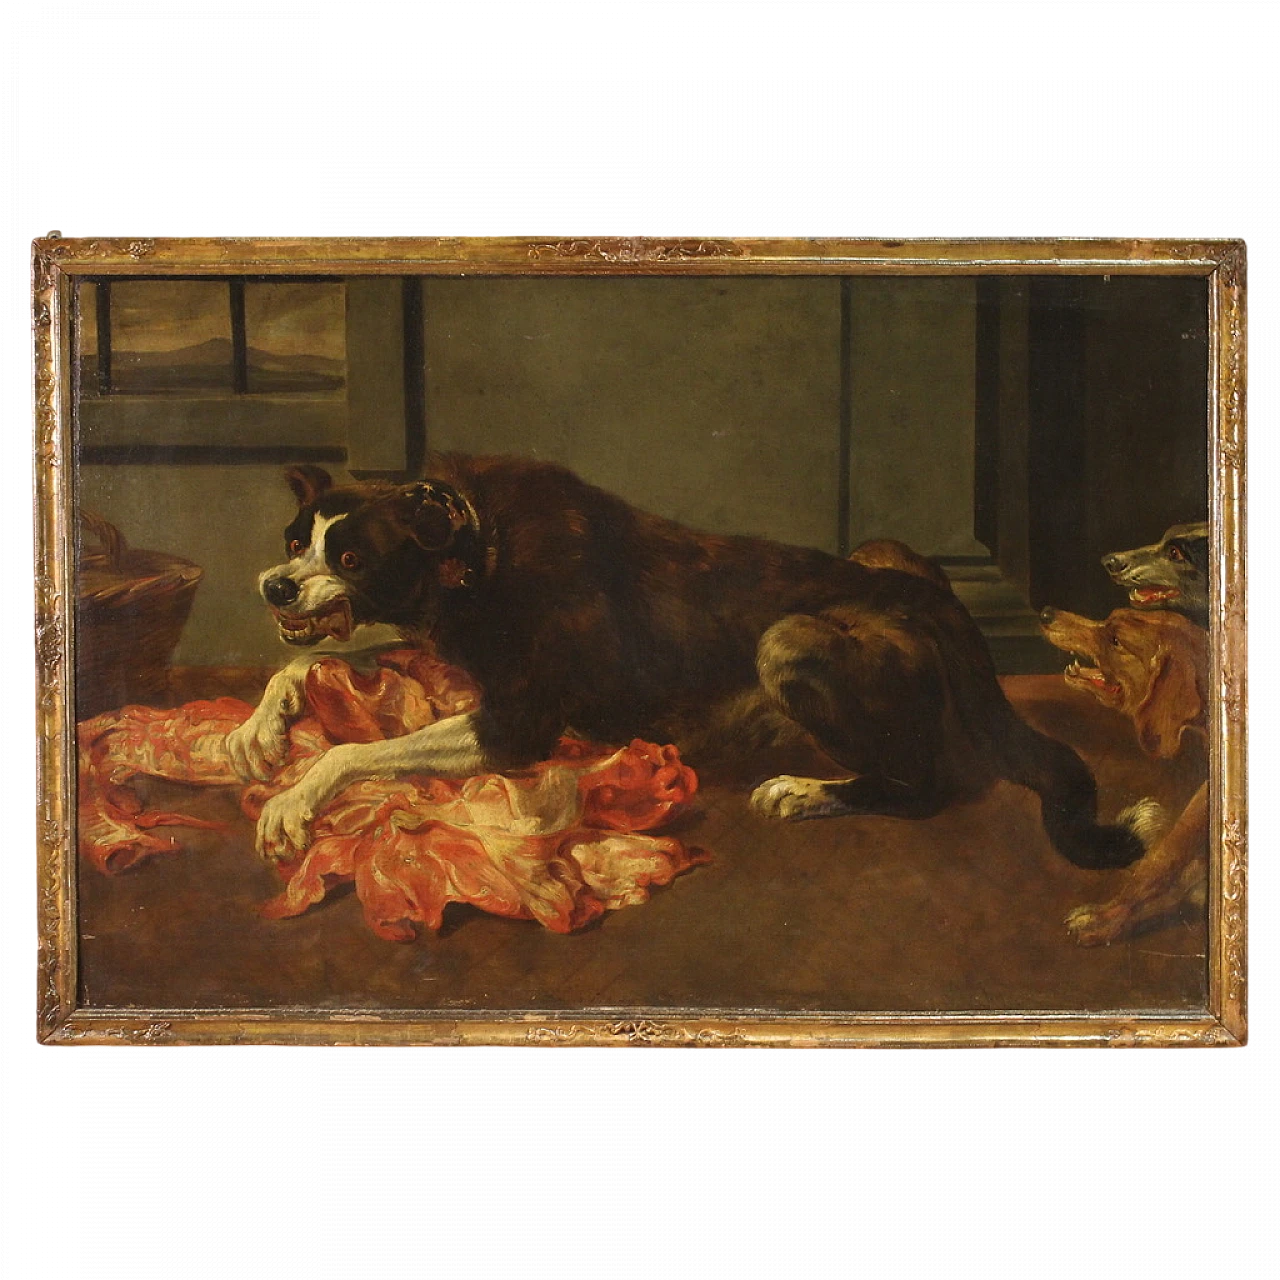 Still life with dogs, oil on canvas, 17th century 17